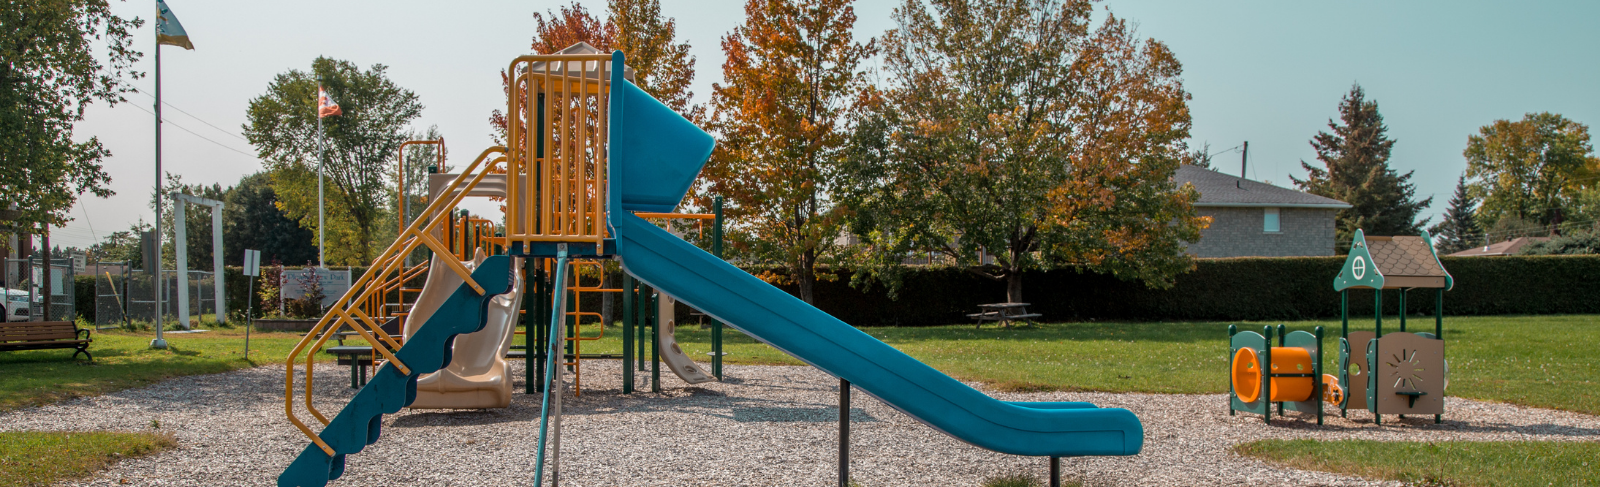 Play structure at Pleasant View Park in LV Township.